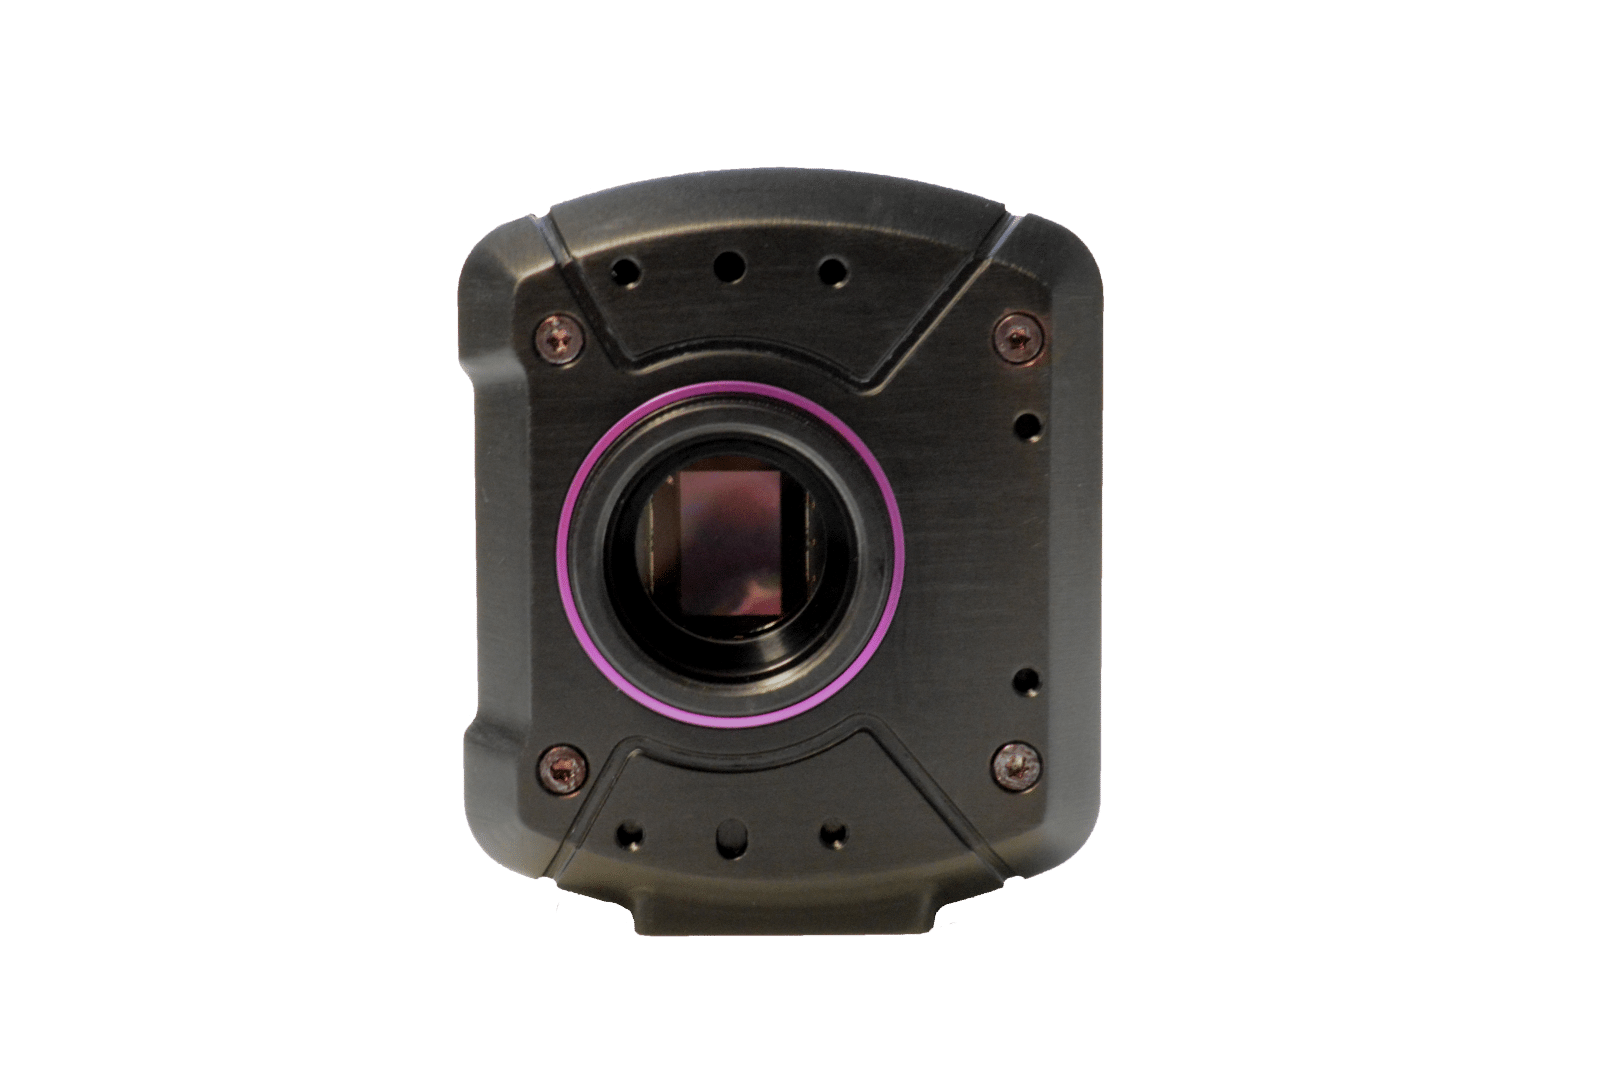 C-BLUE One high speed low noise cmos camera